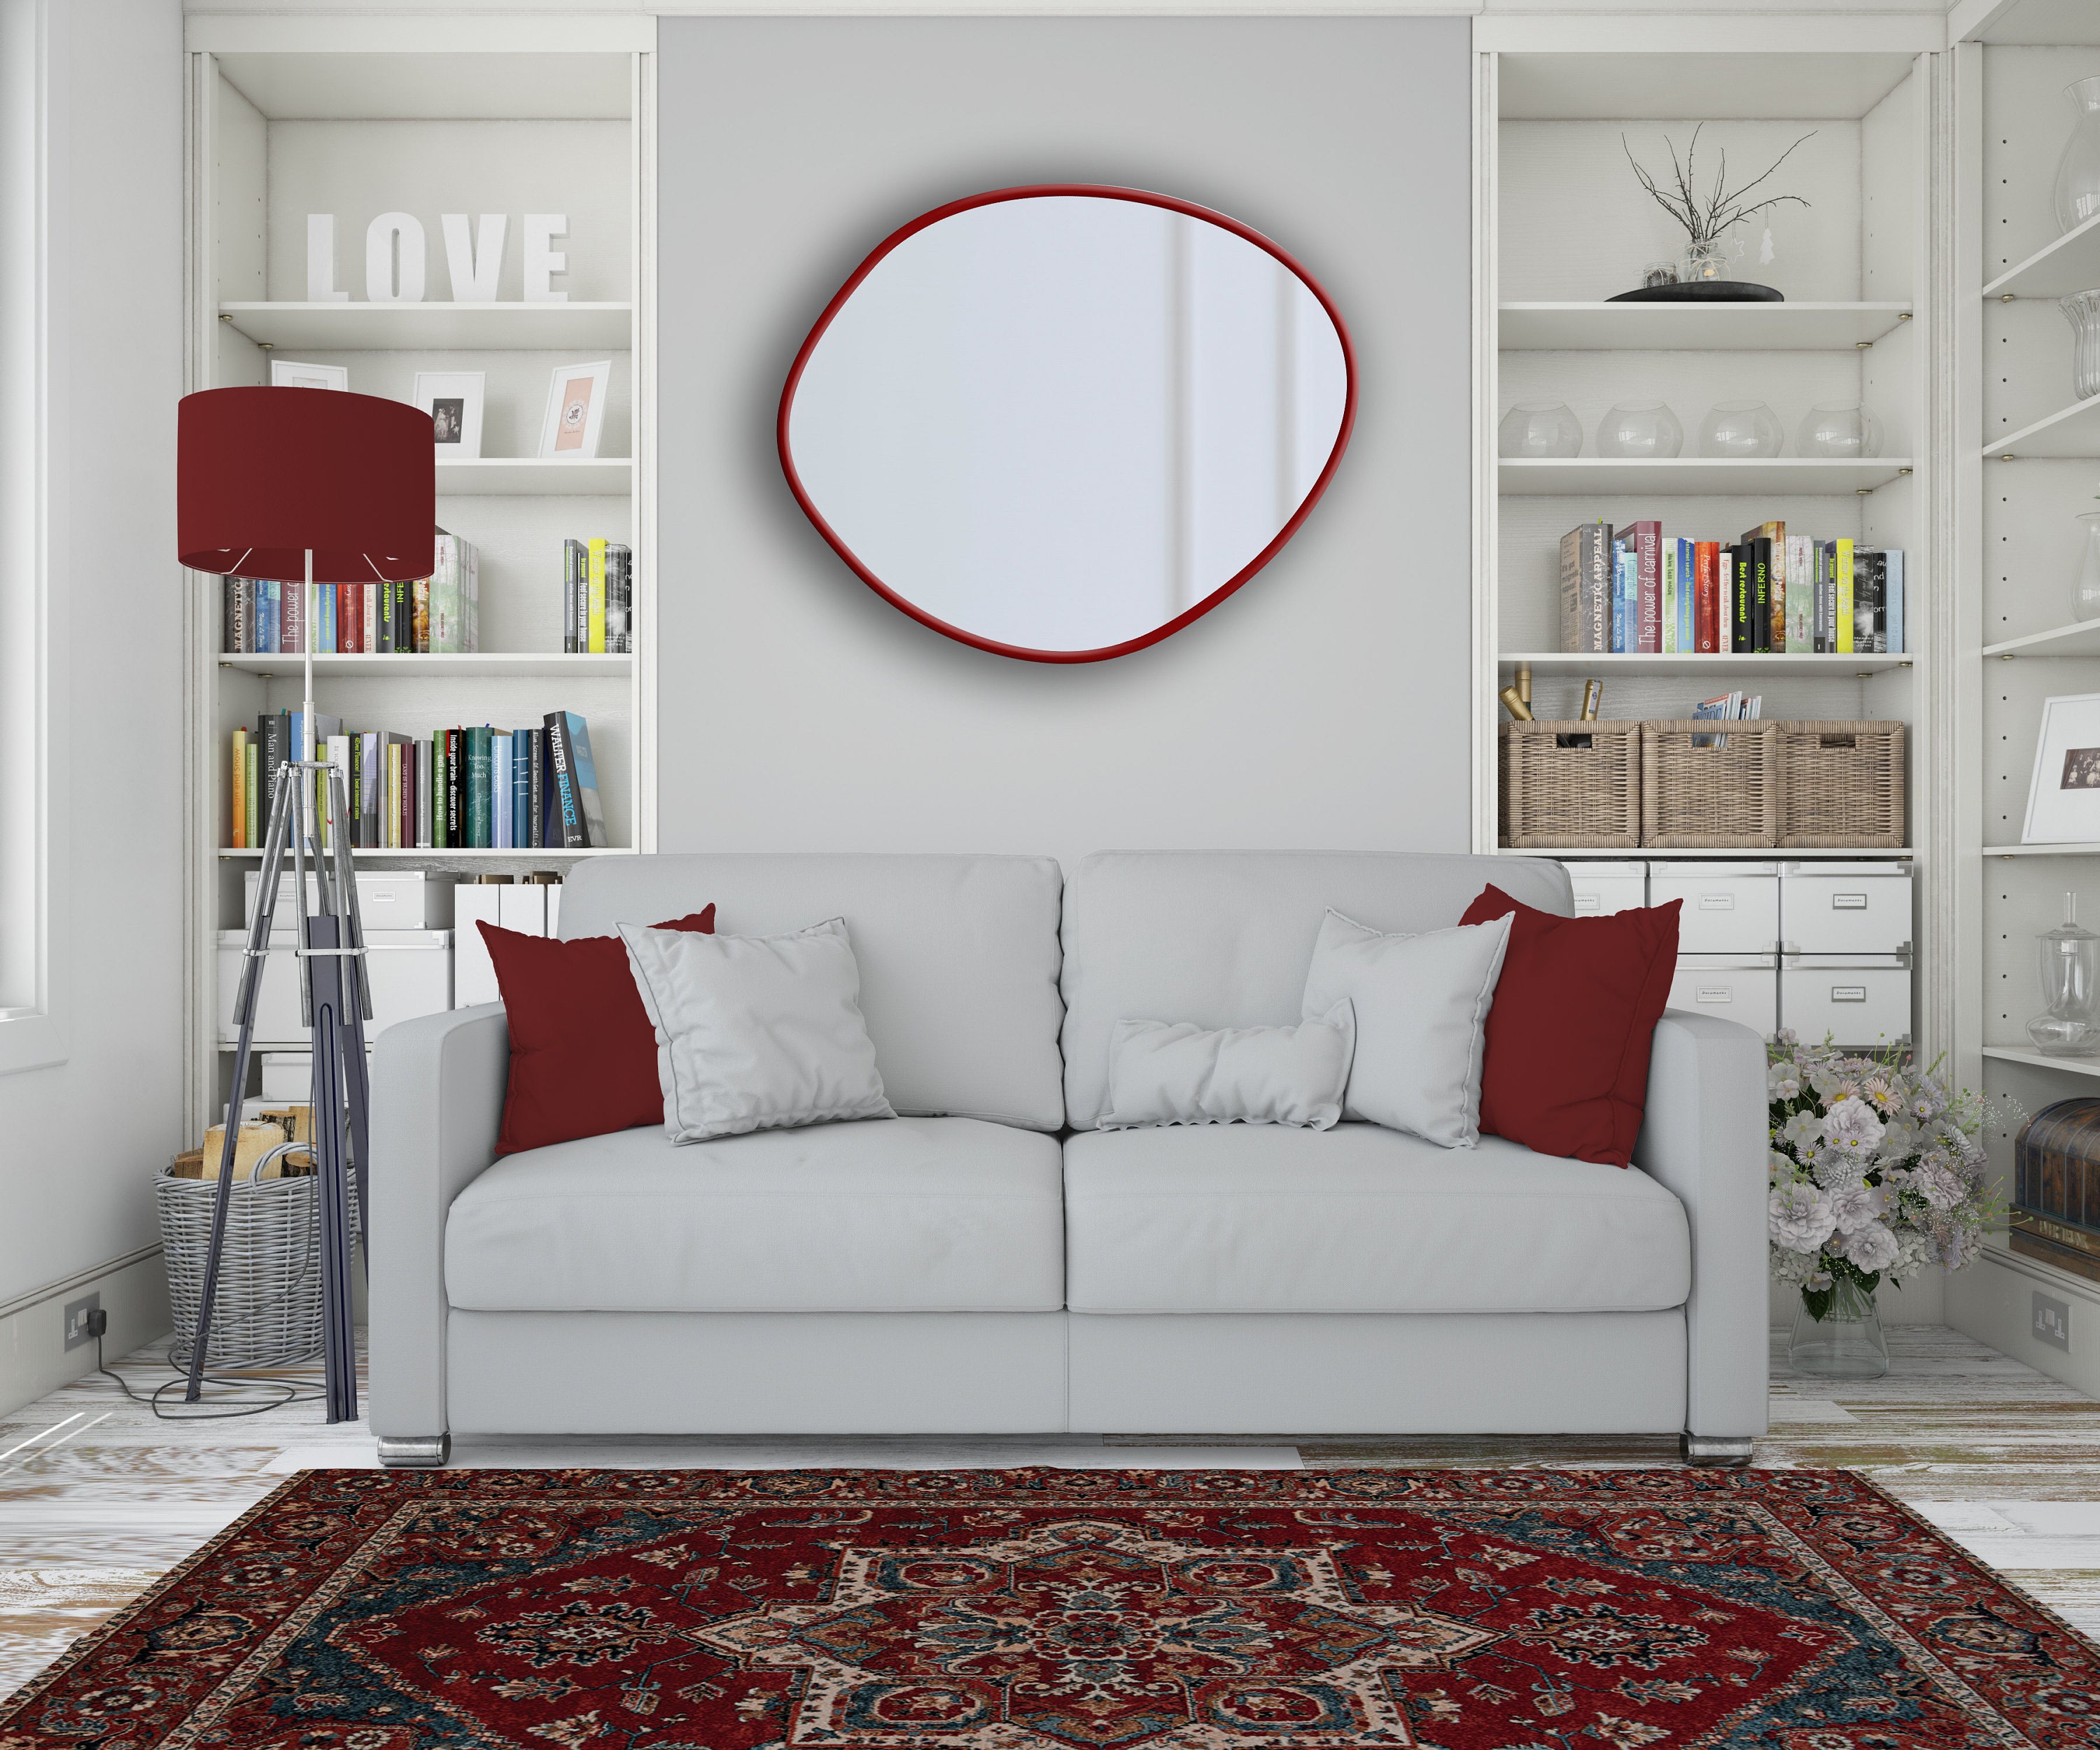 Red frame asymmetrical mirror hung on the wall of a living room above a couch and with red home decor accessories such as red oriental rug.